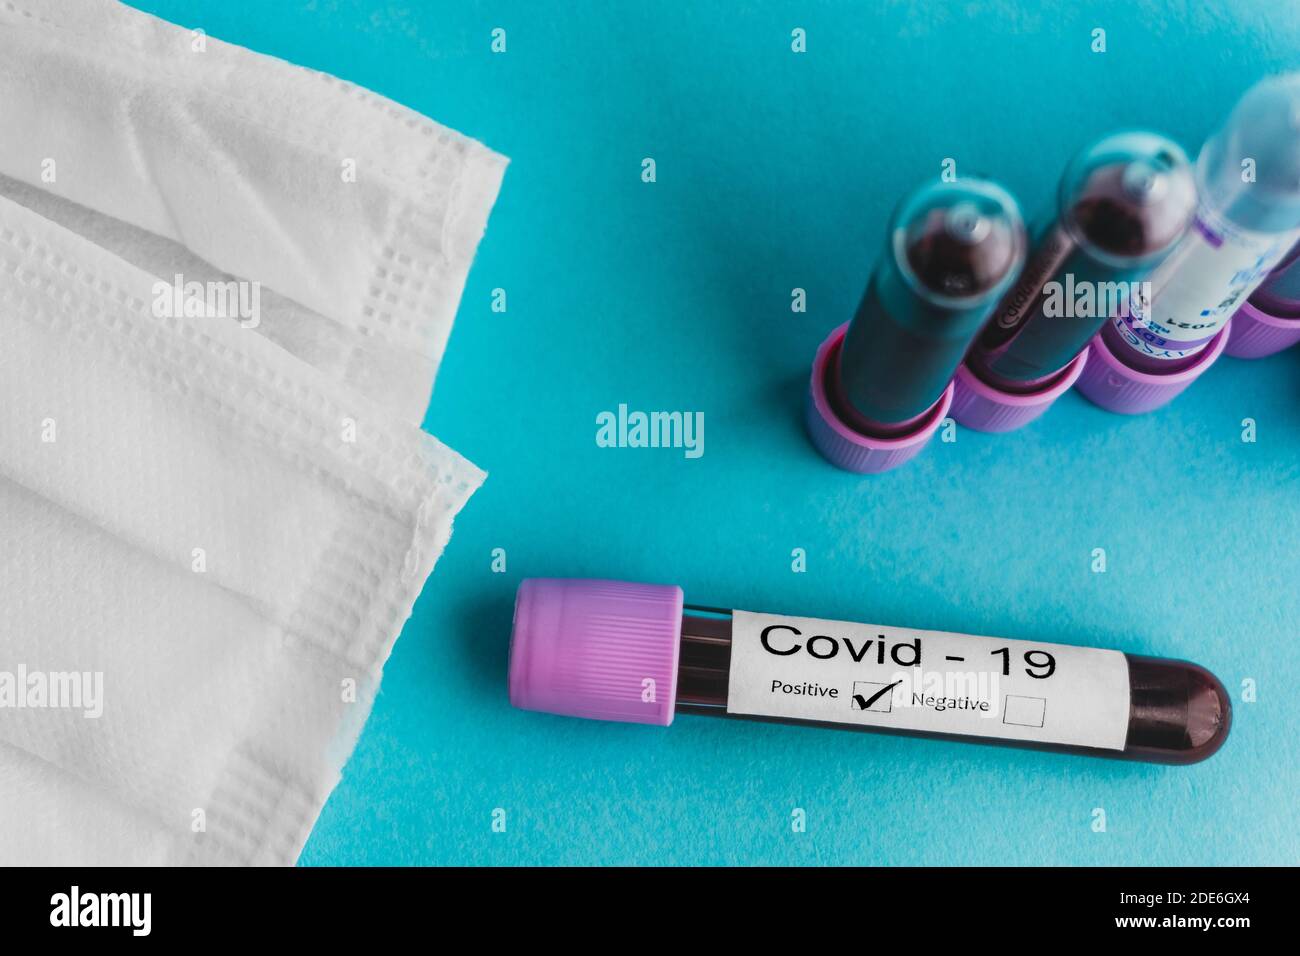 Conceptual photo for coronavirus outbreak. Positive blood test sample. Medical face mask, test tubes with blood sample. Stock Photo